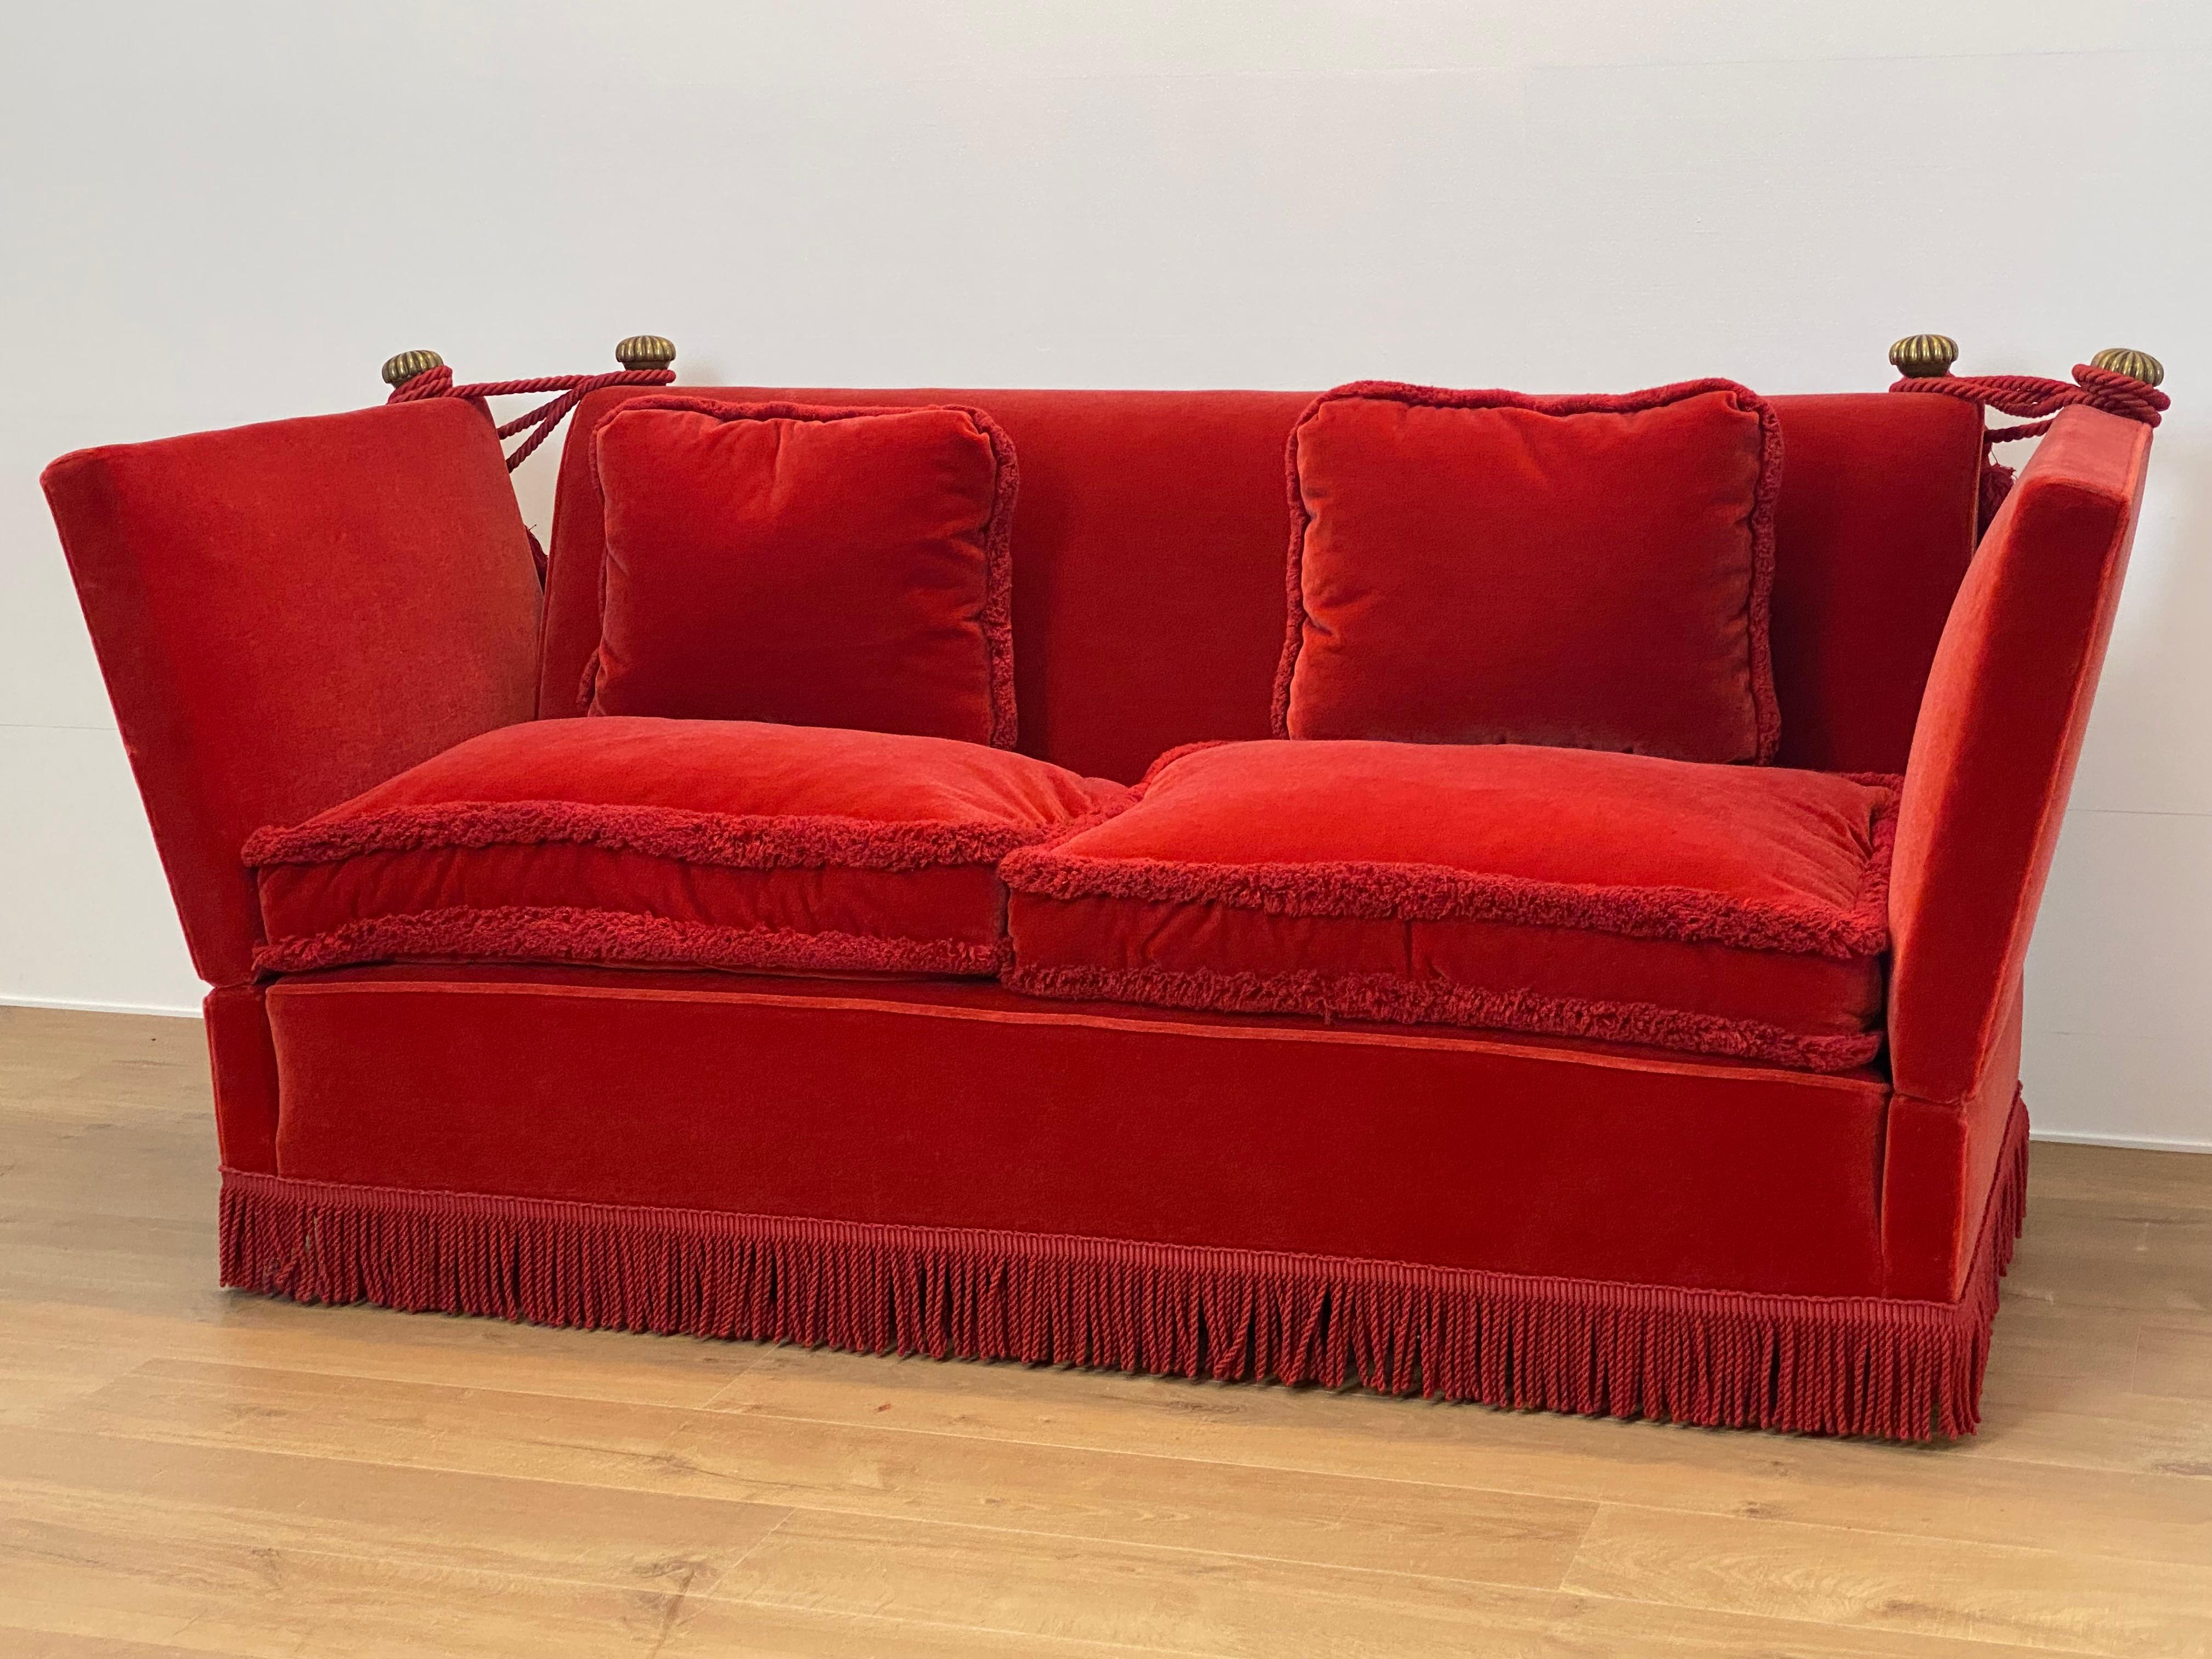 Drop Arm Knoll Style Sofa in an Orange-Red Velvet For Sale 2